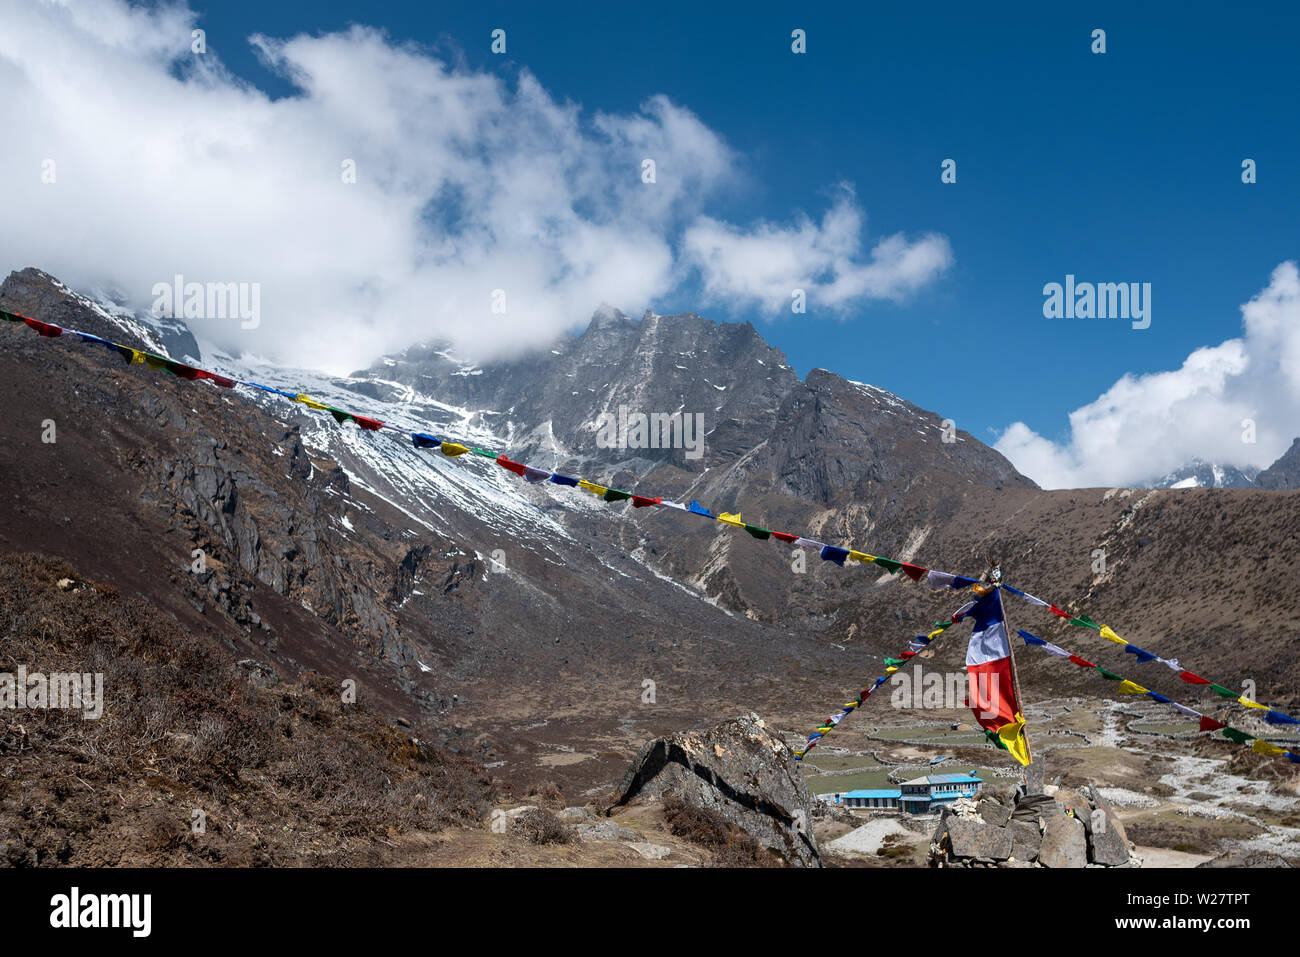 Traditional buddhist flags with mantras over tiny settlement amidst mountains in Nepal Himalayas Stock Photo